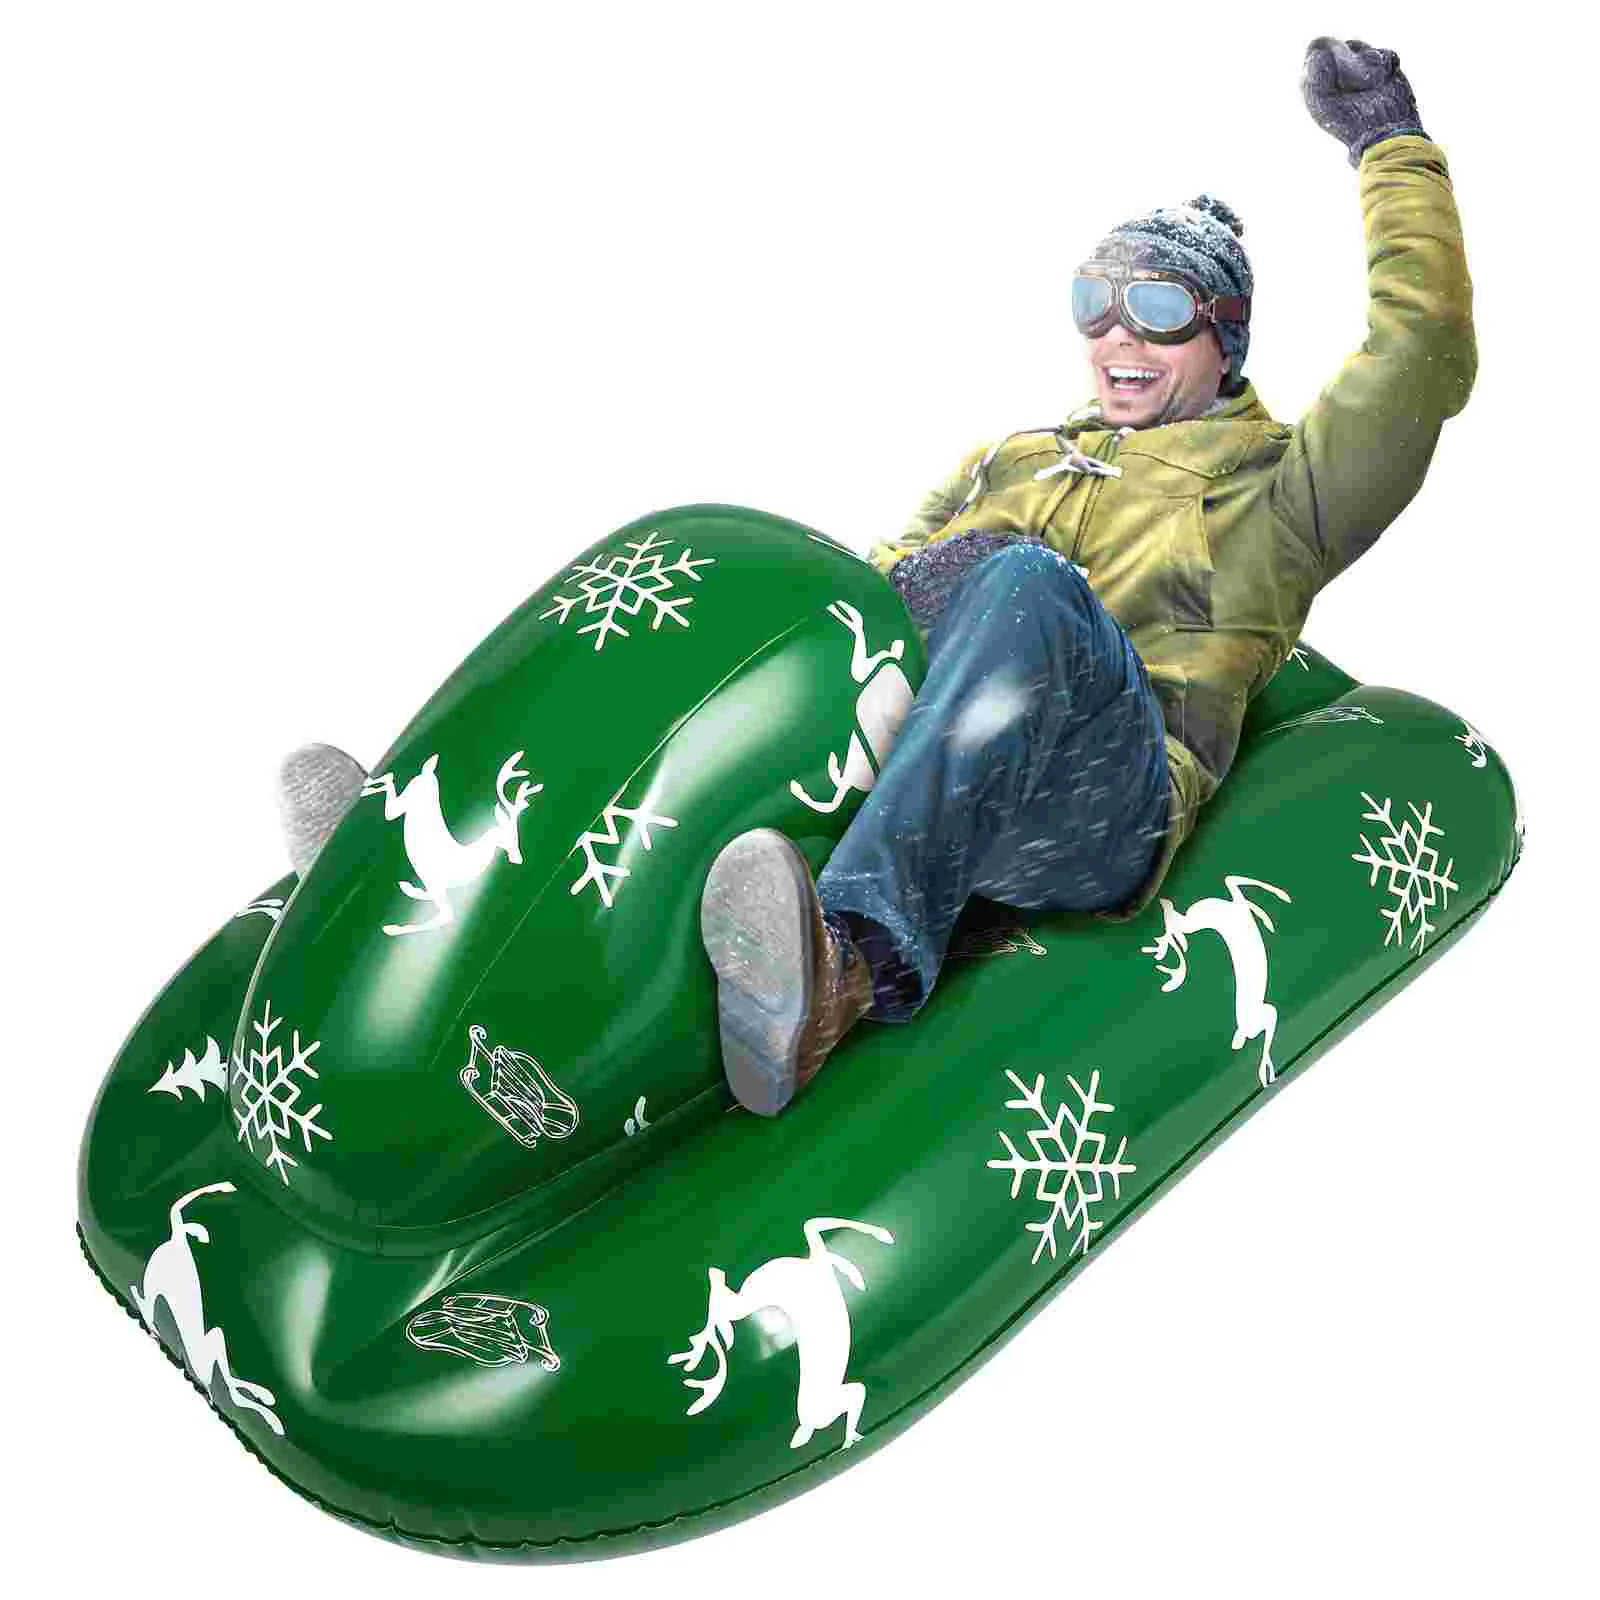 

Clispeed Winter Snow Sled Inflatable Snow Rider Snow Racer with Heavy Duty Handles for Kids Adults (Green)